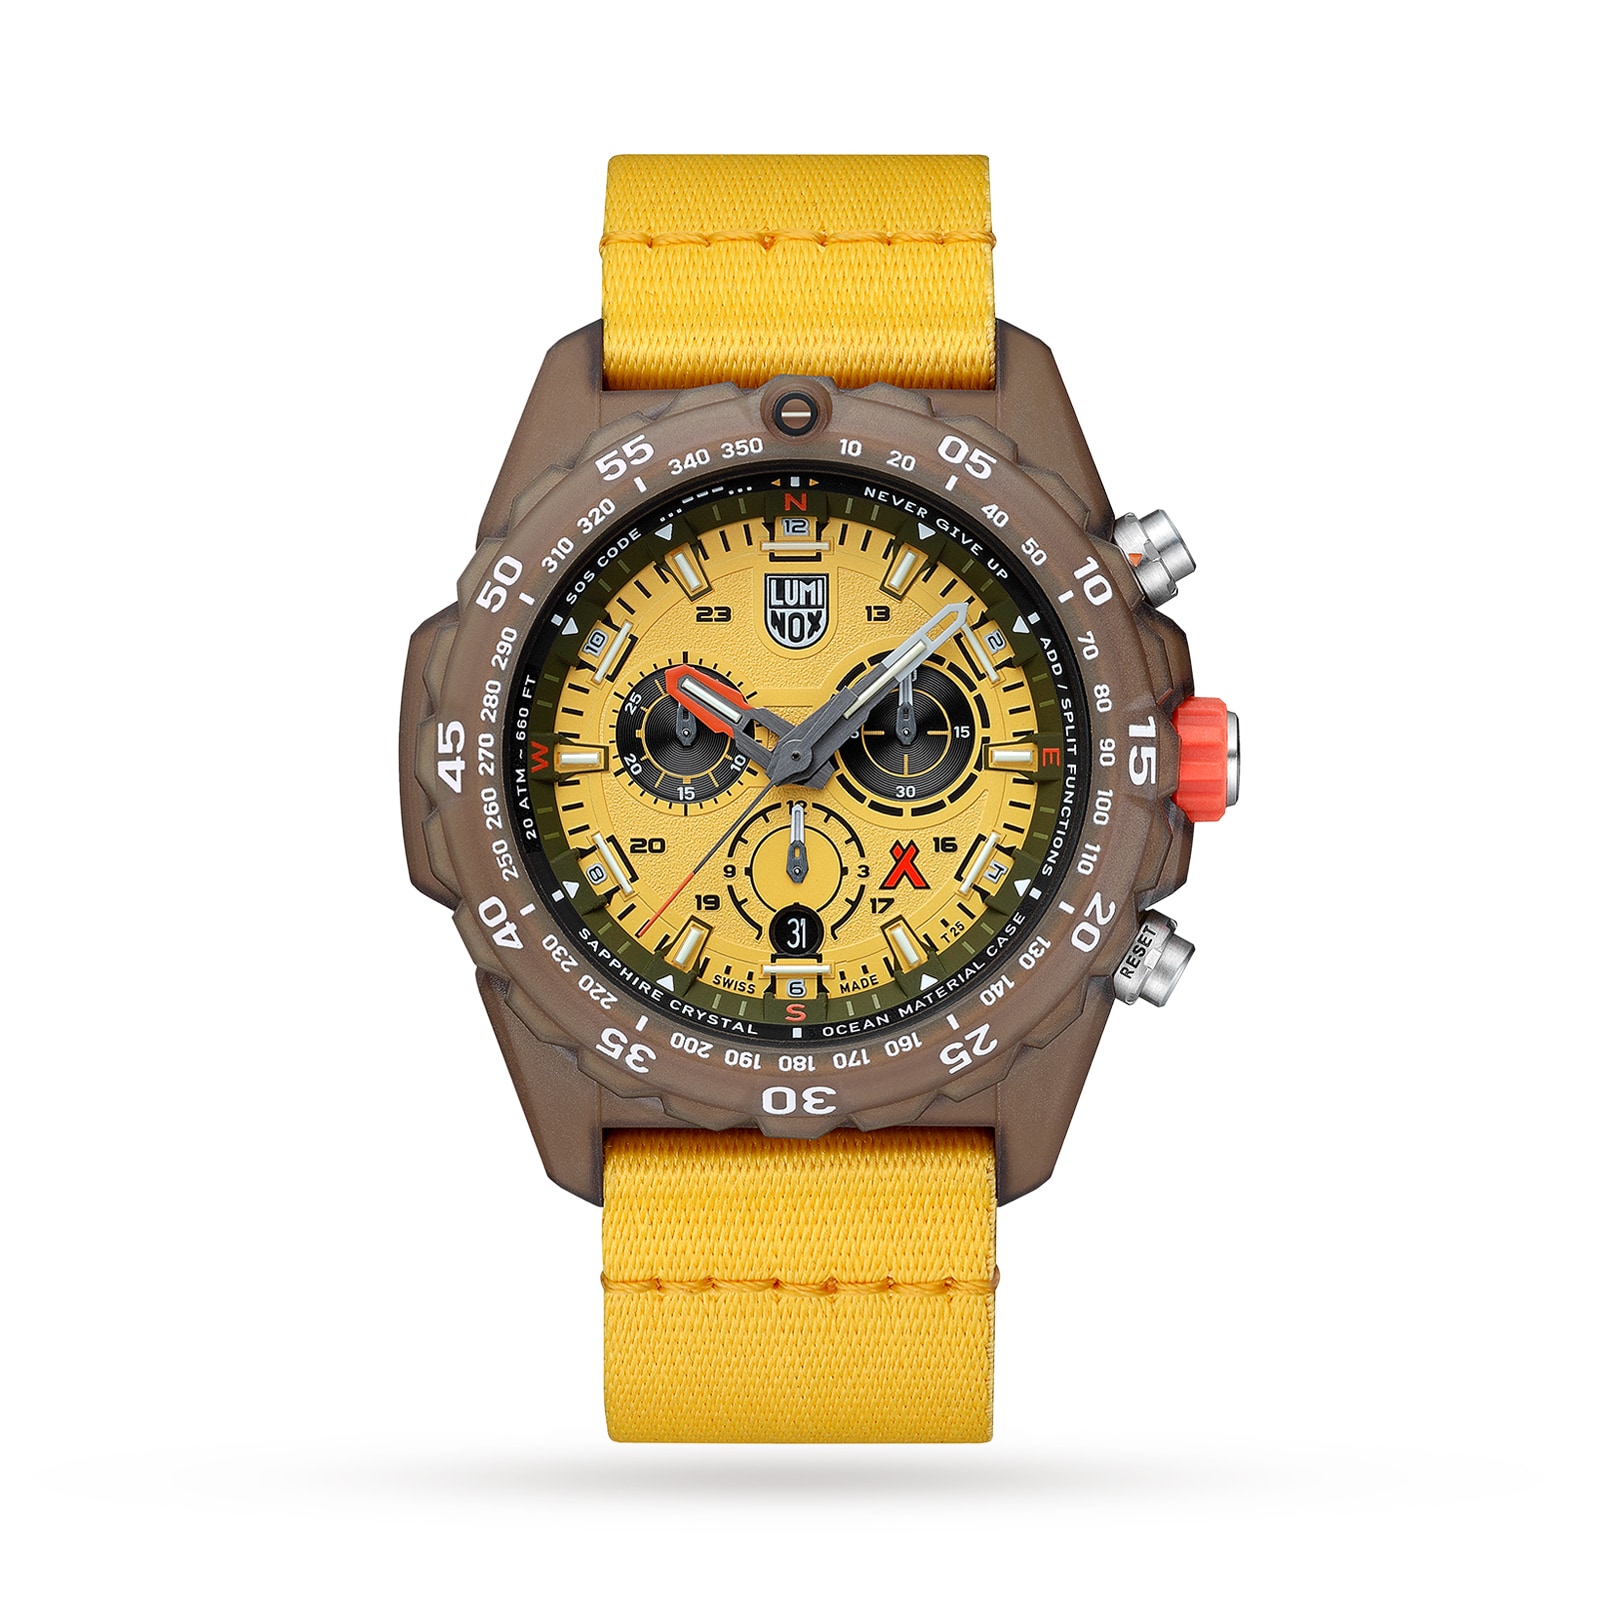 Bear Grylls Survival Eco Master 45mm, Yellow Dial, Sustainable Outdoor Watch